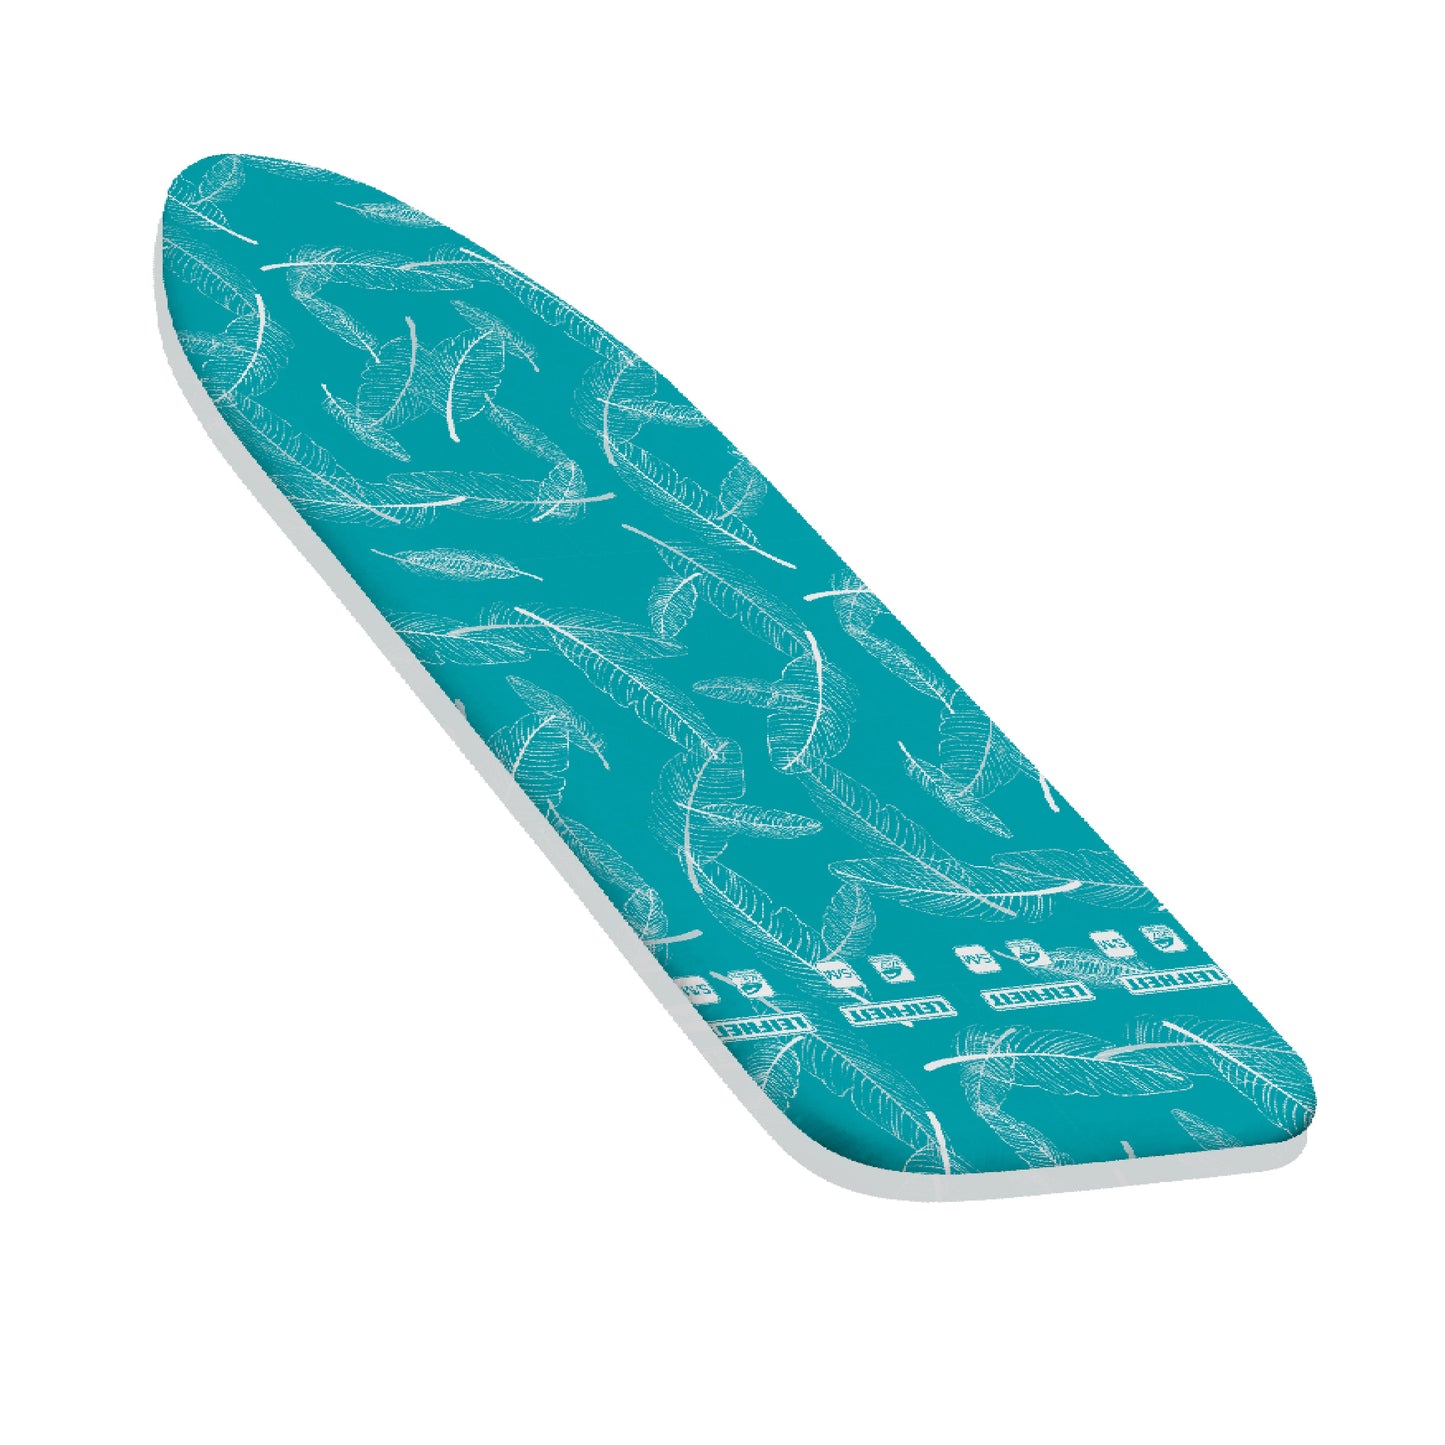 Leifheit Thermo Reflect Ironing Board Cover (140cm x 45cm)